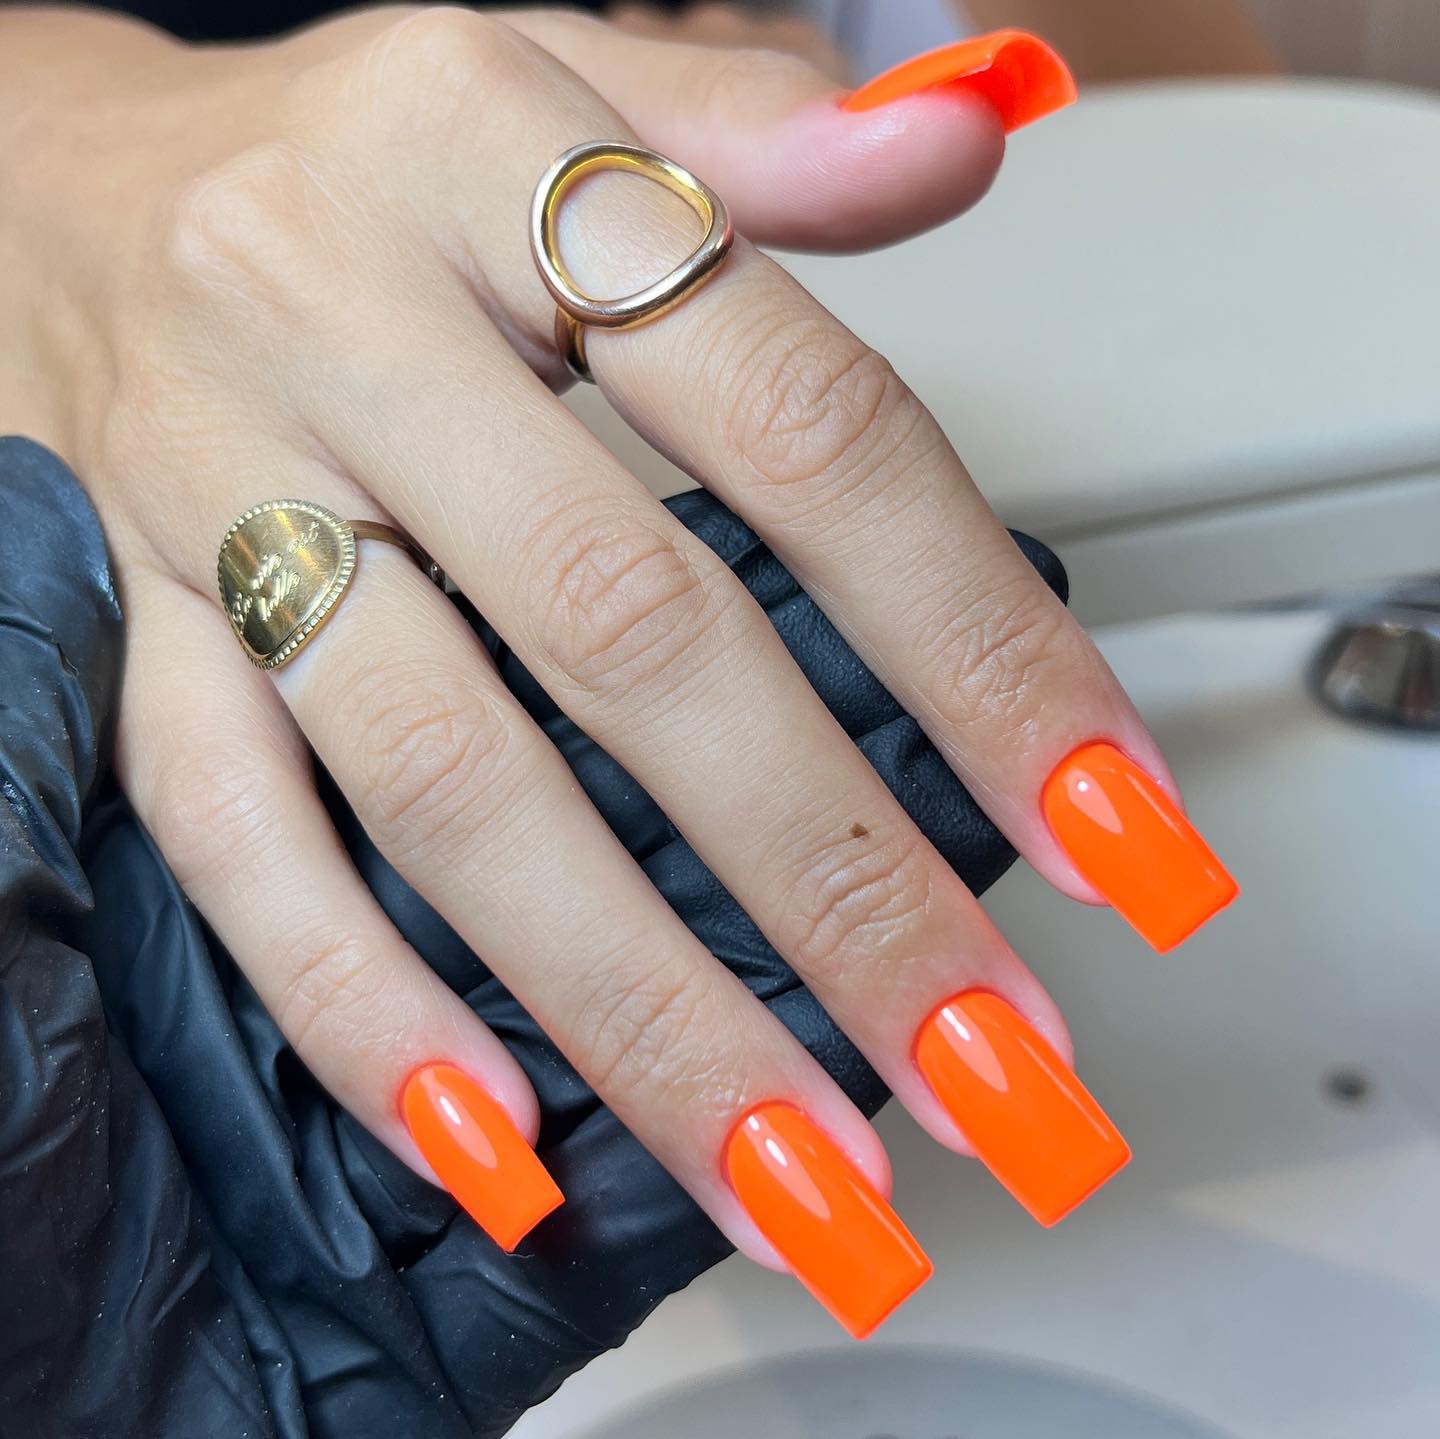 Who doesn't want to mesmerize people? If you do, this is one of the best summer nail color ideas.